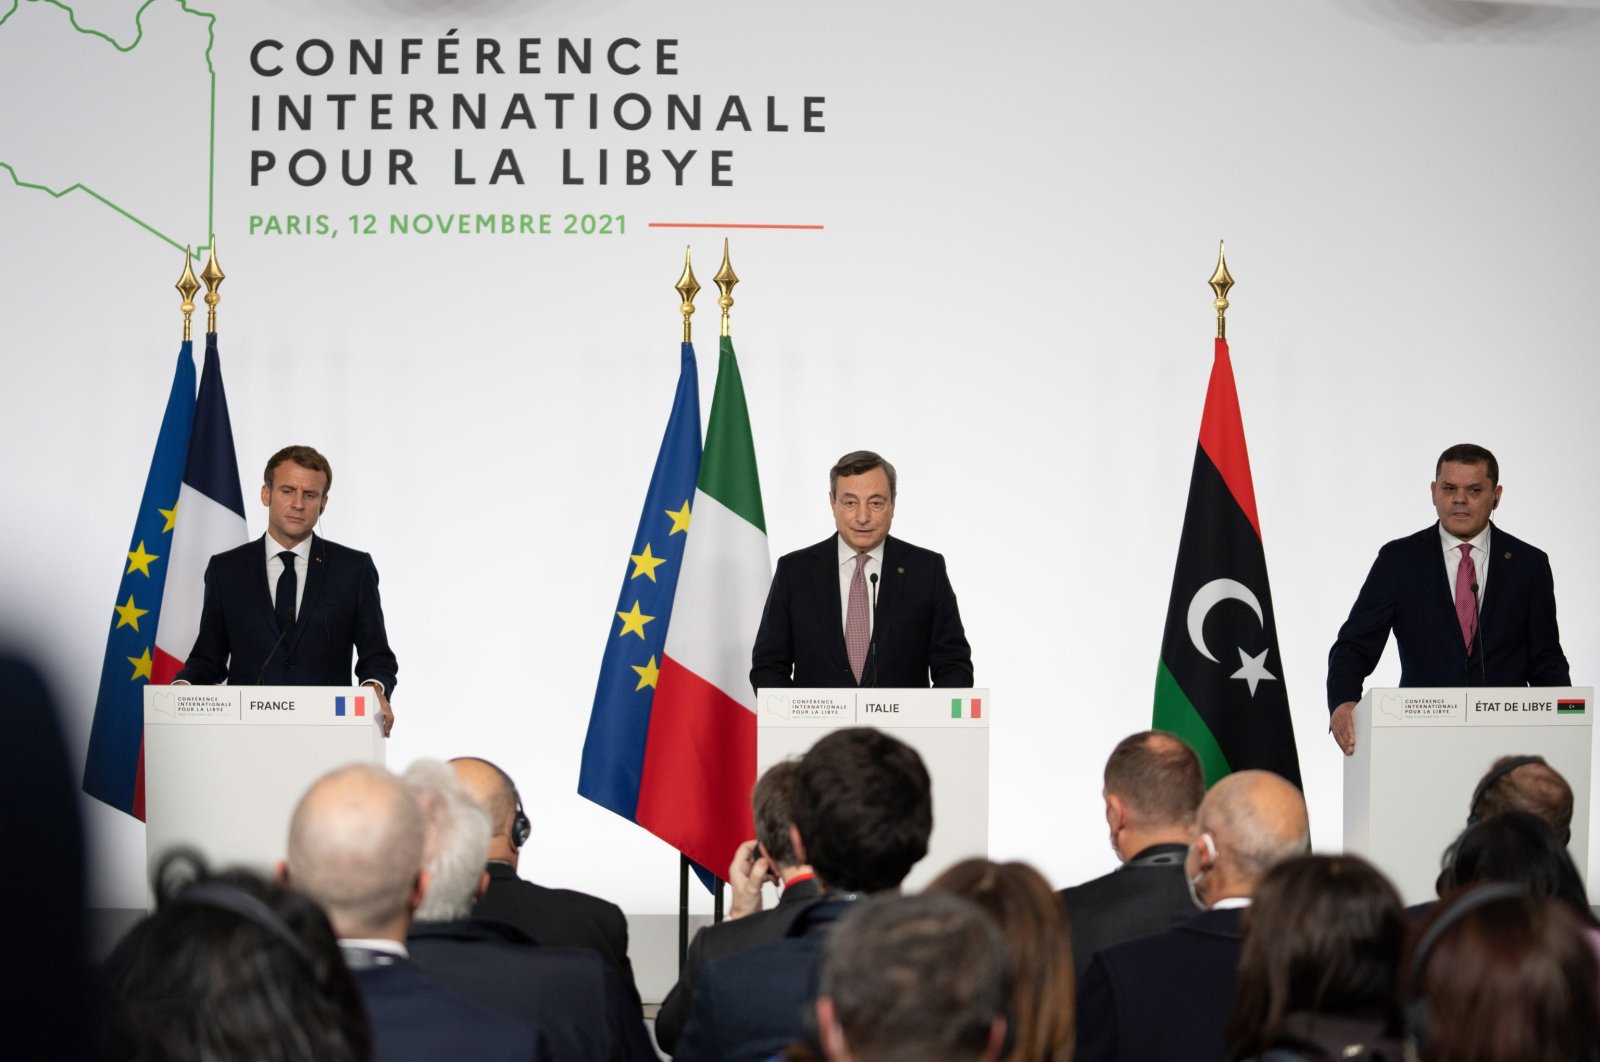 (L-R) French President Emmanuel Macron, Italian Prime Minister Mario Draghi and Libyan Prime Minister Abdul Hamid Dbeibah participate in the press conference at the end of the International Conference on Libya at La Maison de la Chimie in Paris, France, 12 November 2021.  (EPA Photo)